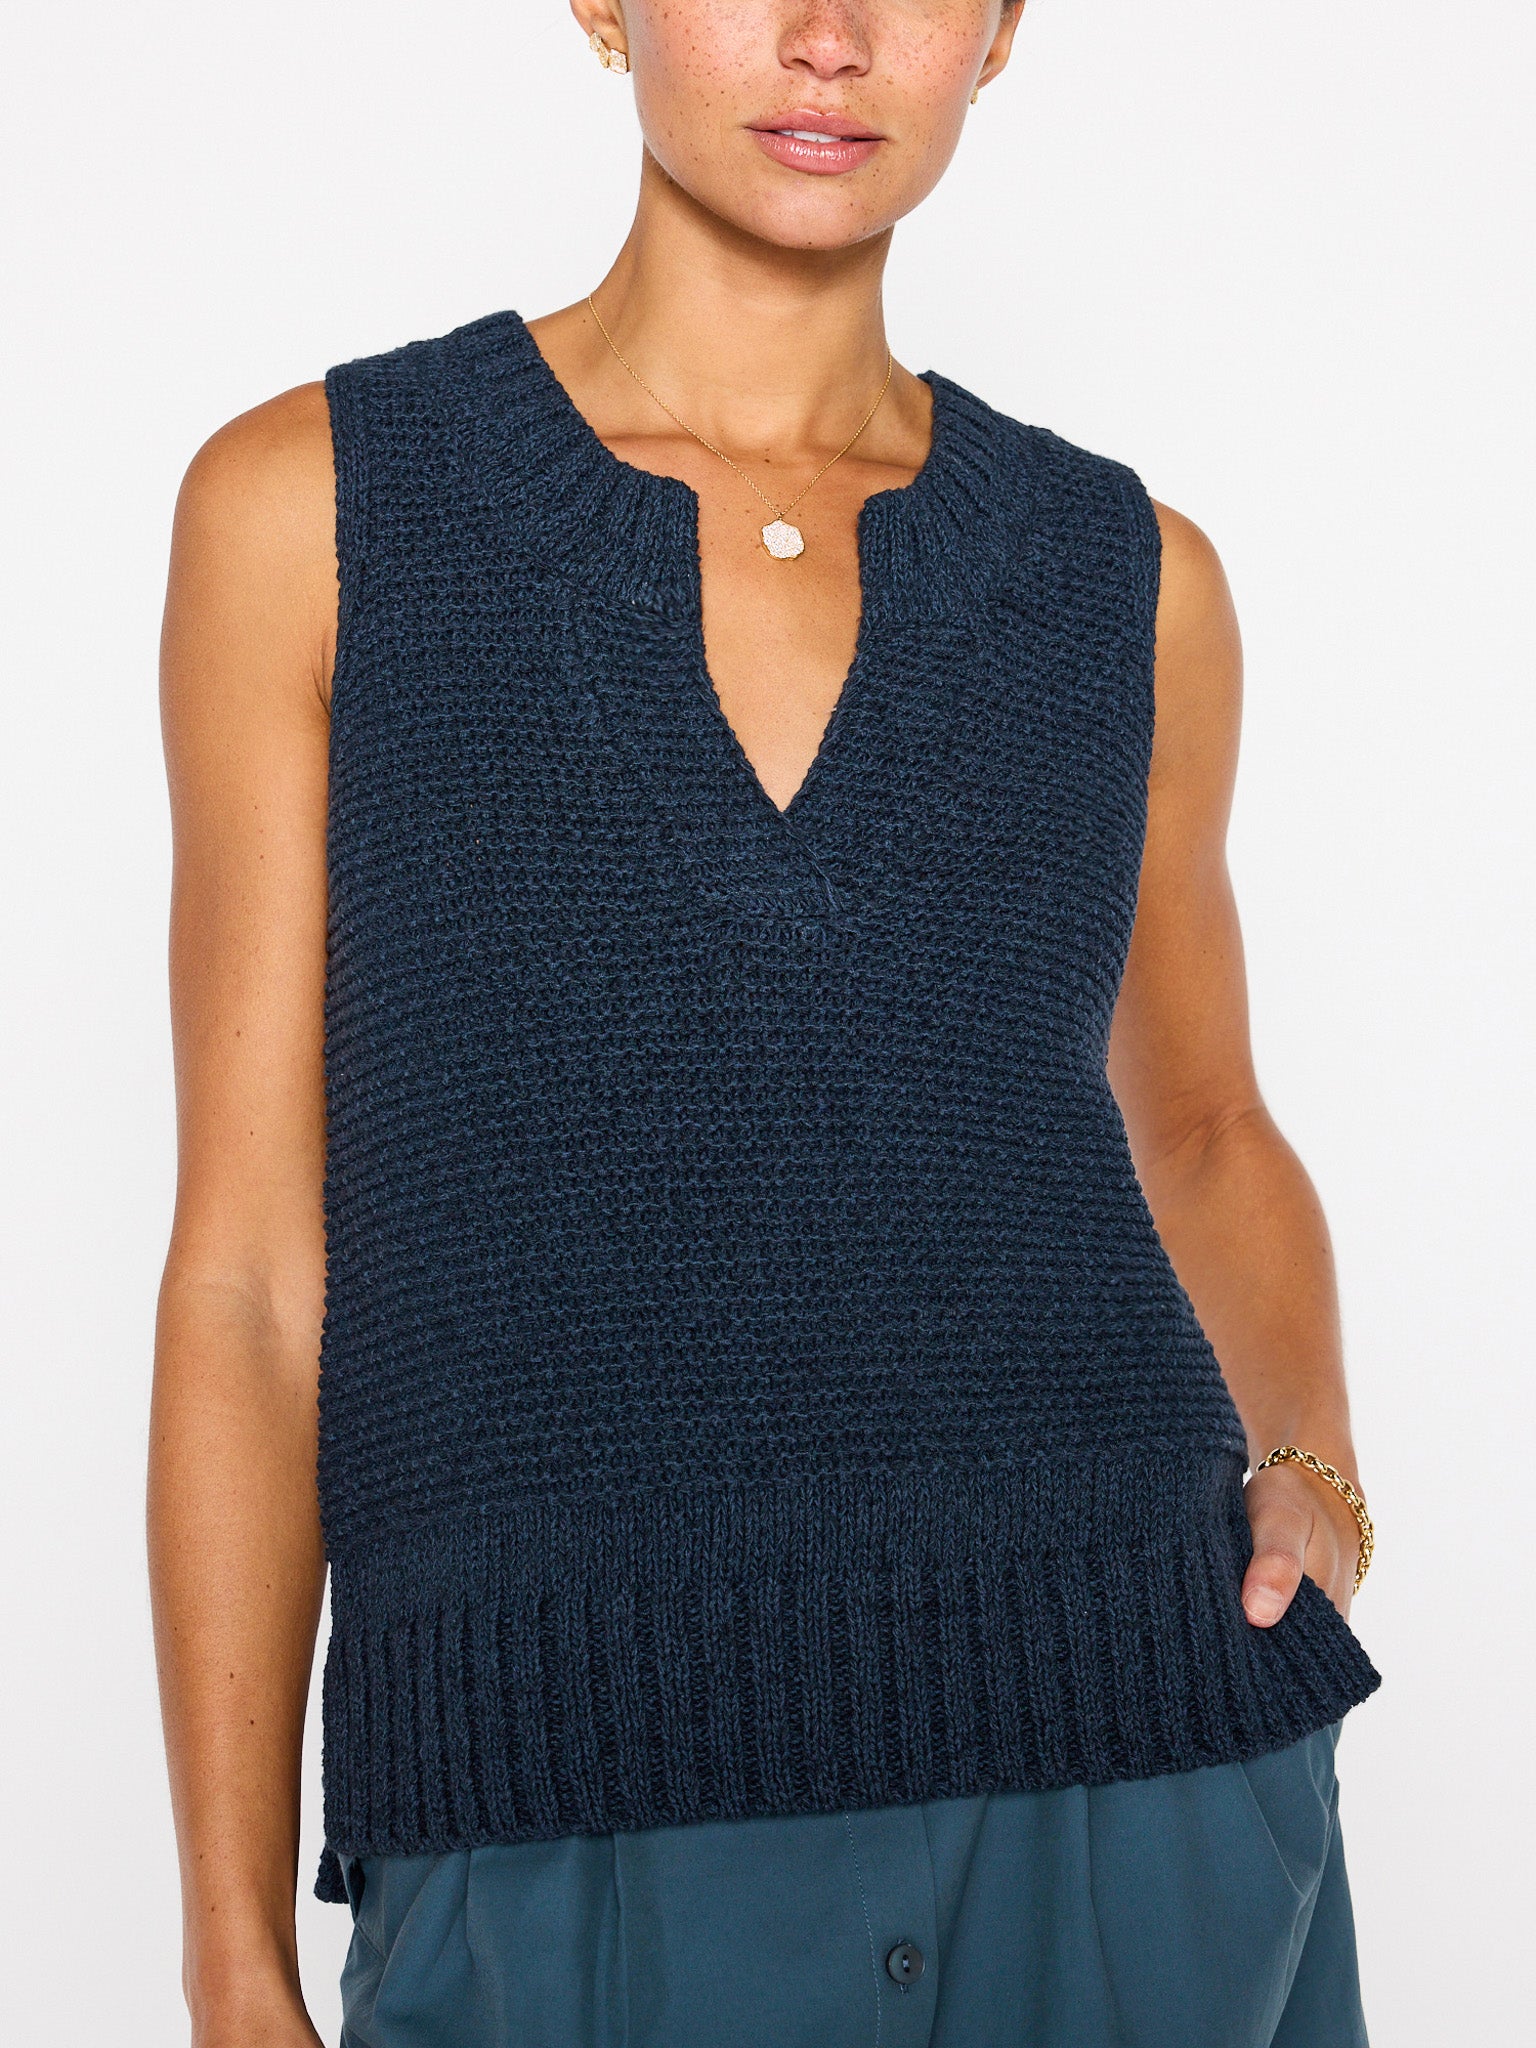 Roe v-neck cotton-linen navy sweater tank front view 2